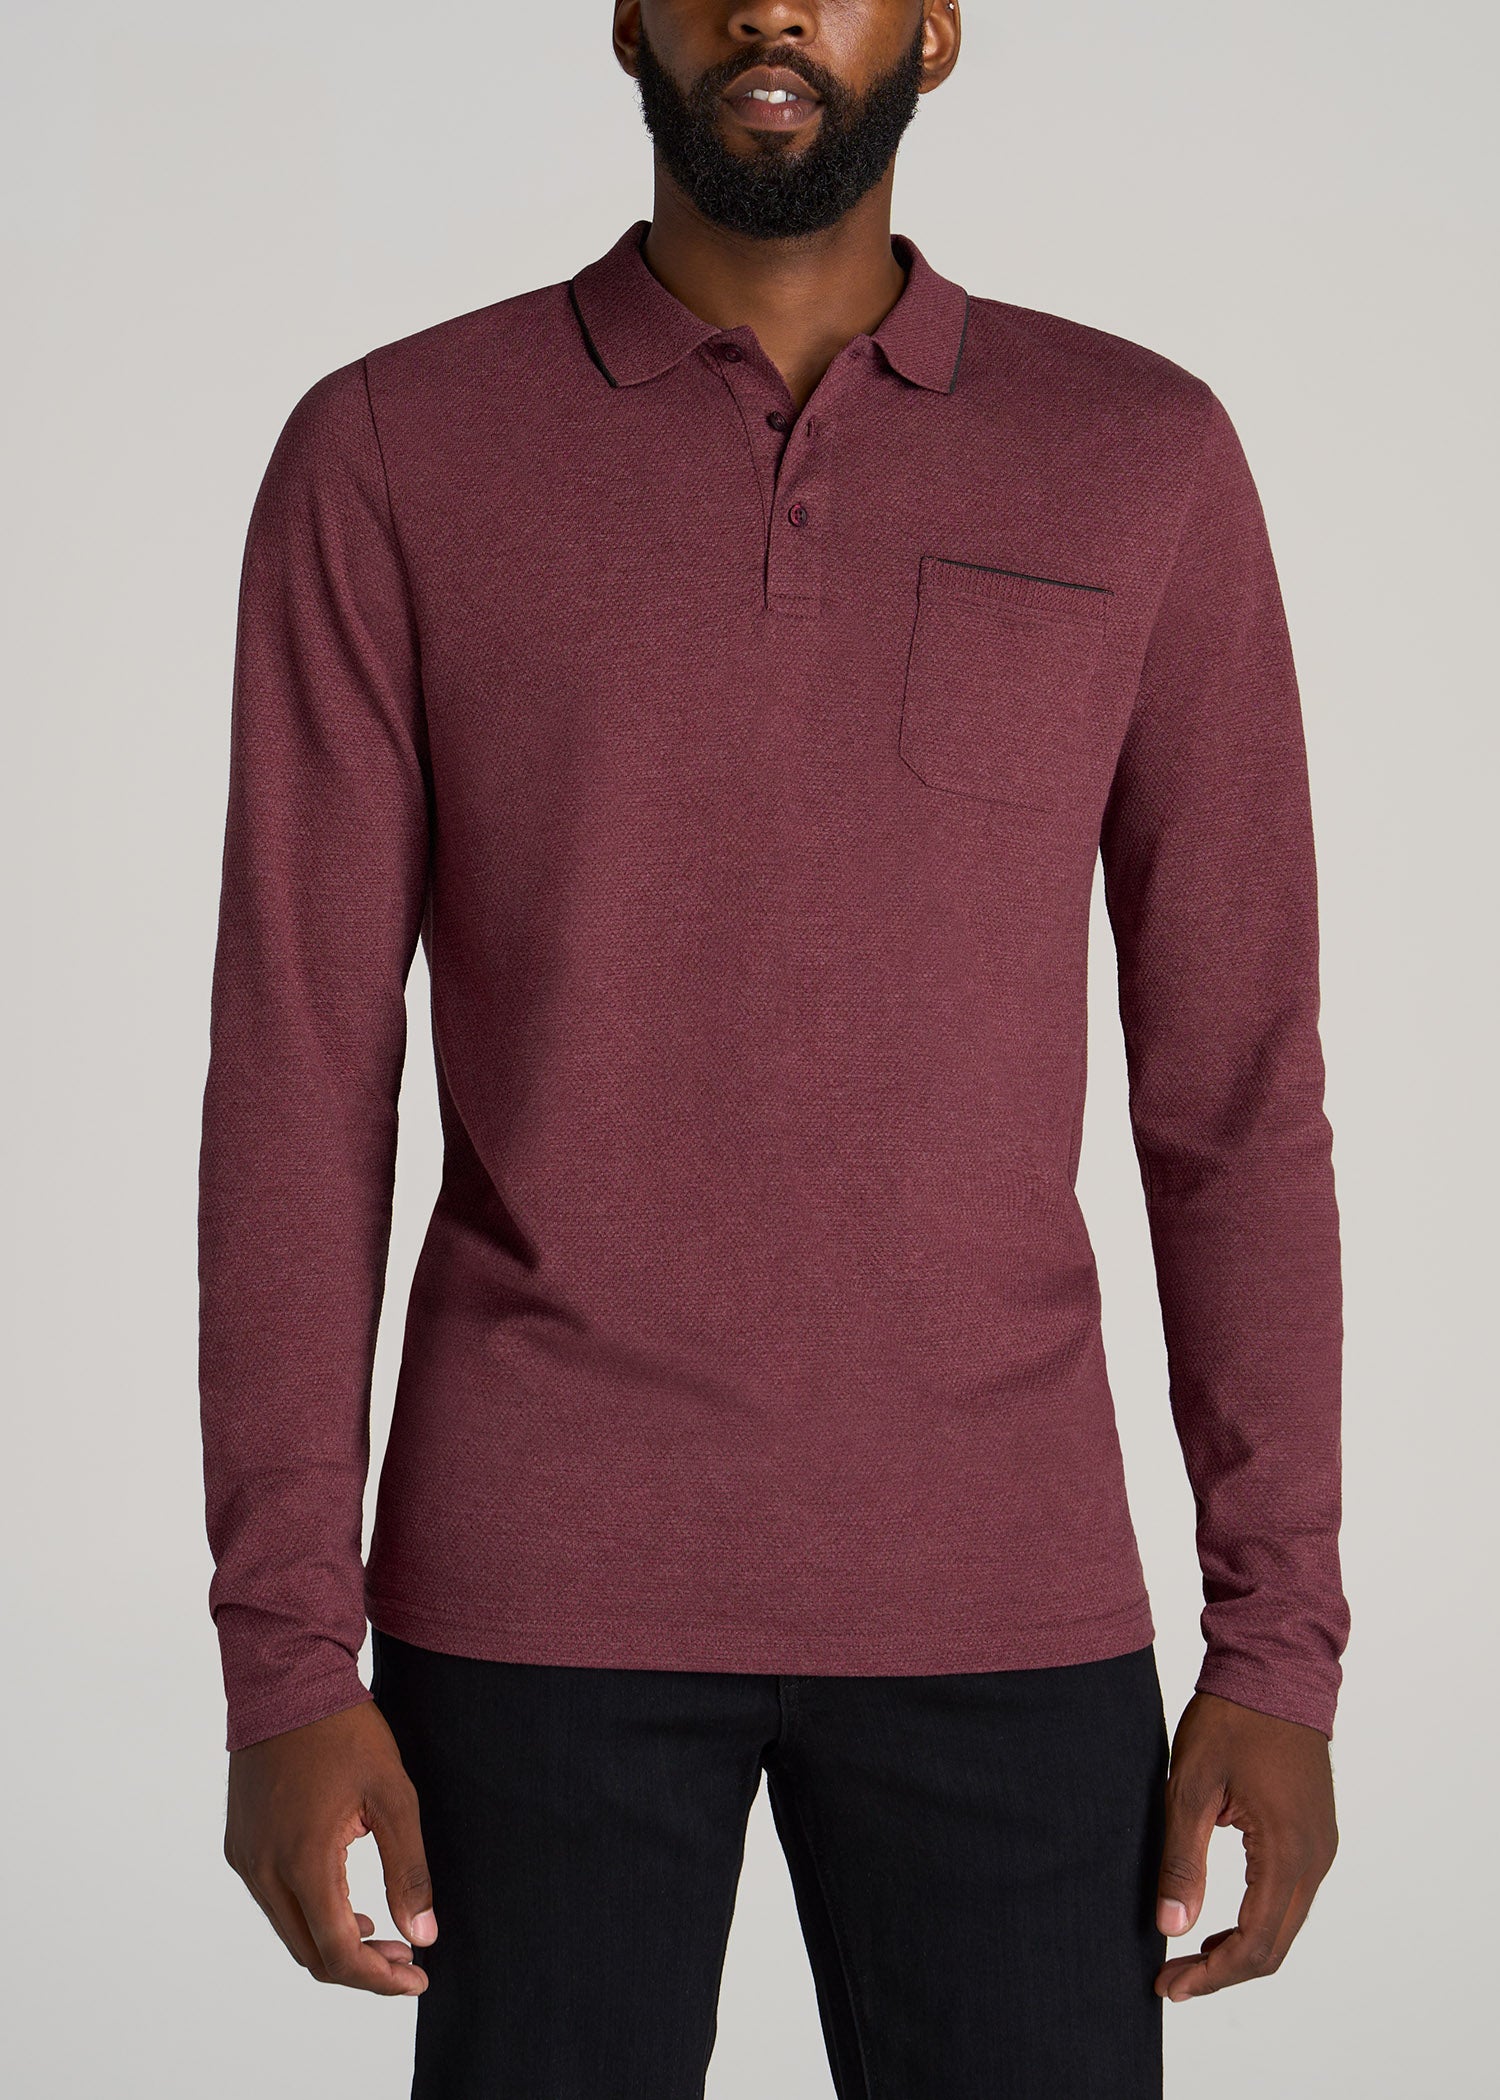    American-Tall-Men-3-Button-Placket-Polo-Shirt-Maroon-Mix-Black-front